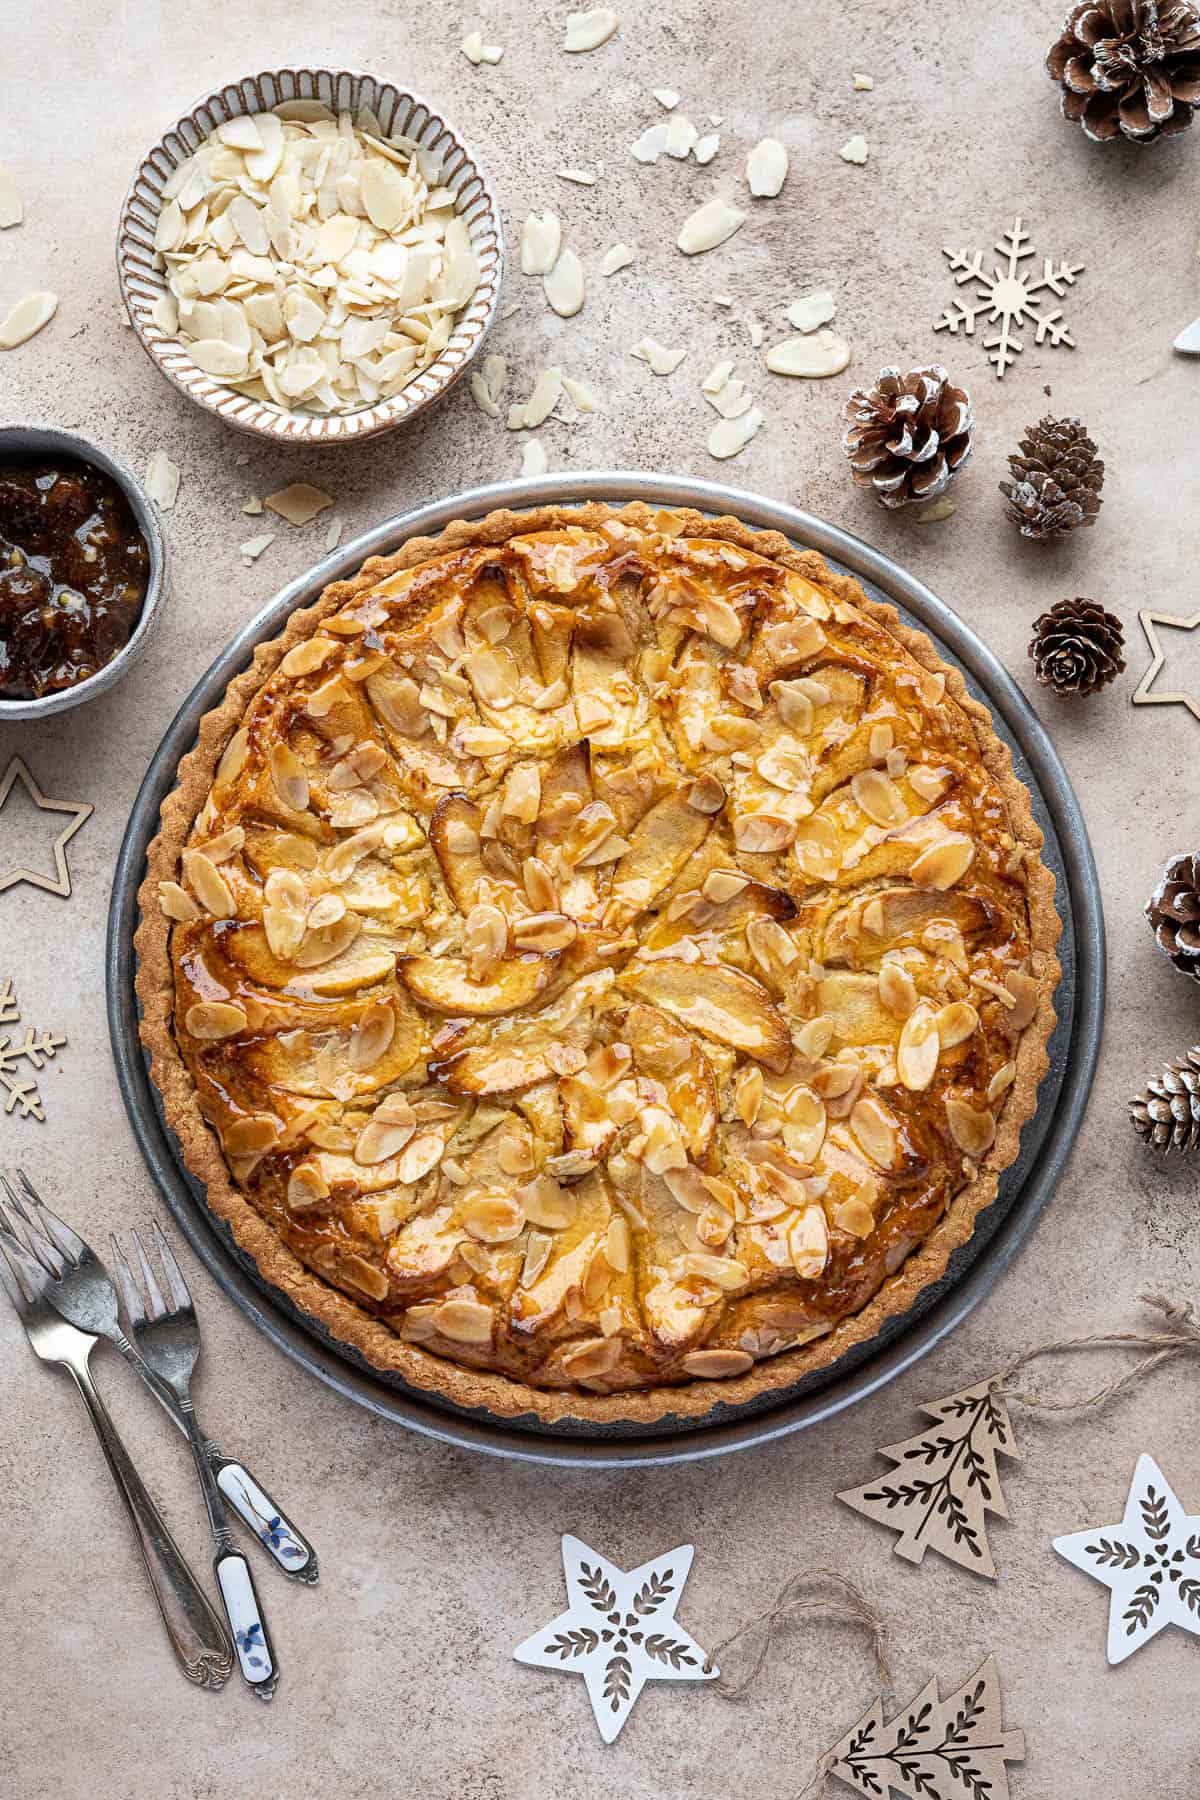 Vegan mincemeat frangipane tart on a metal plate surrounded by pinecones, Christmas decorations and bowls of flaked almonds and mincemeat.